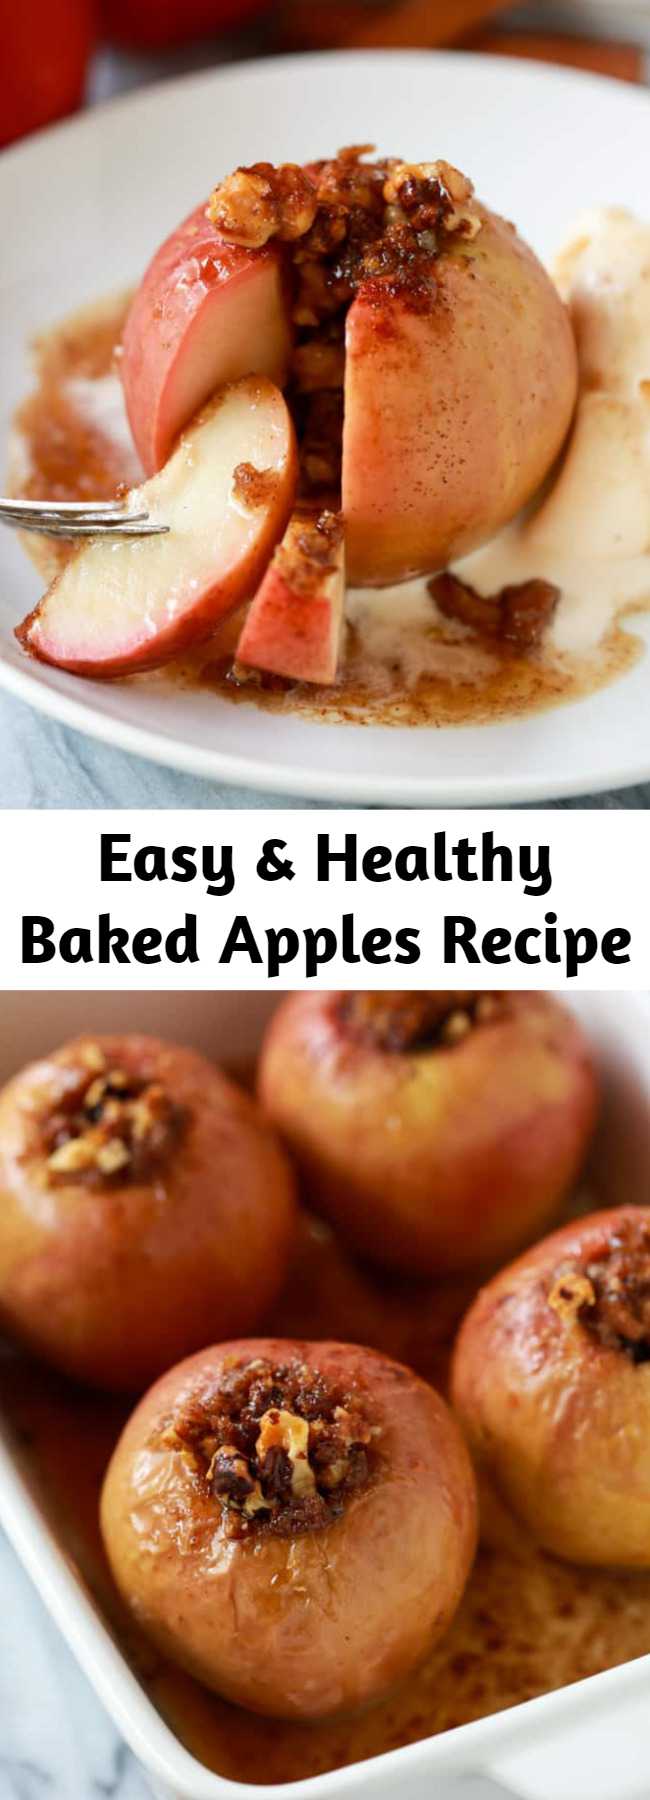 Easy & Healthy Baked Apples Recipe - These easy Baked Apples are a delicious healthy fall dessert. Crisp fresh apples stuffed with a cinnamon sugar, walnut mixture and baked until warm and tender. Serve with a scoop of vanilla ice cream.